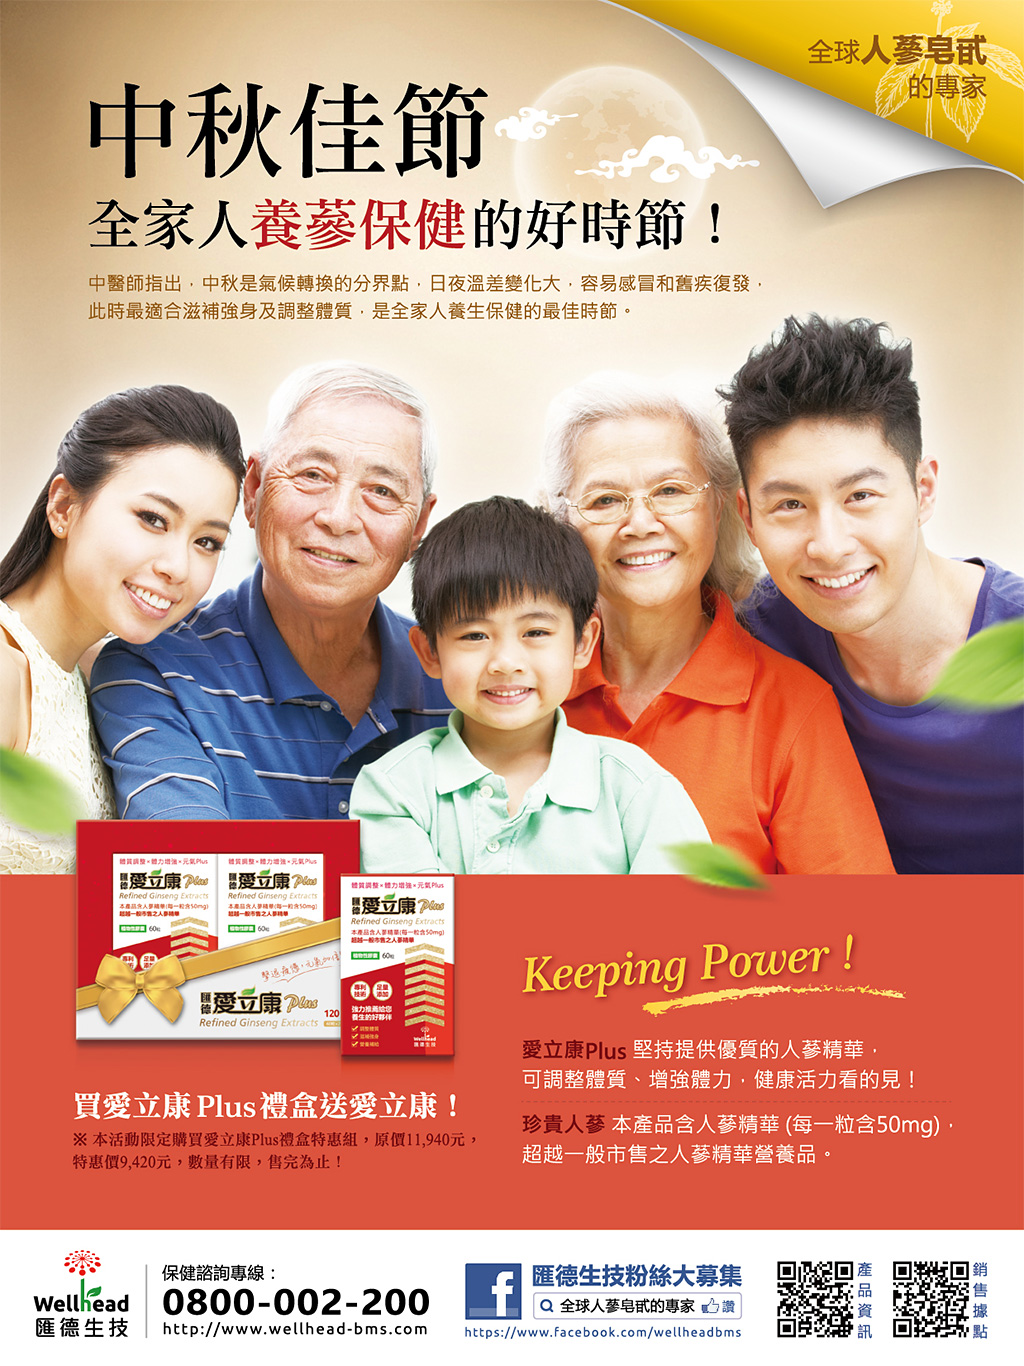 It is a great time to care about family health with ginseng in Moon Festival